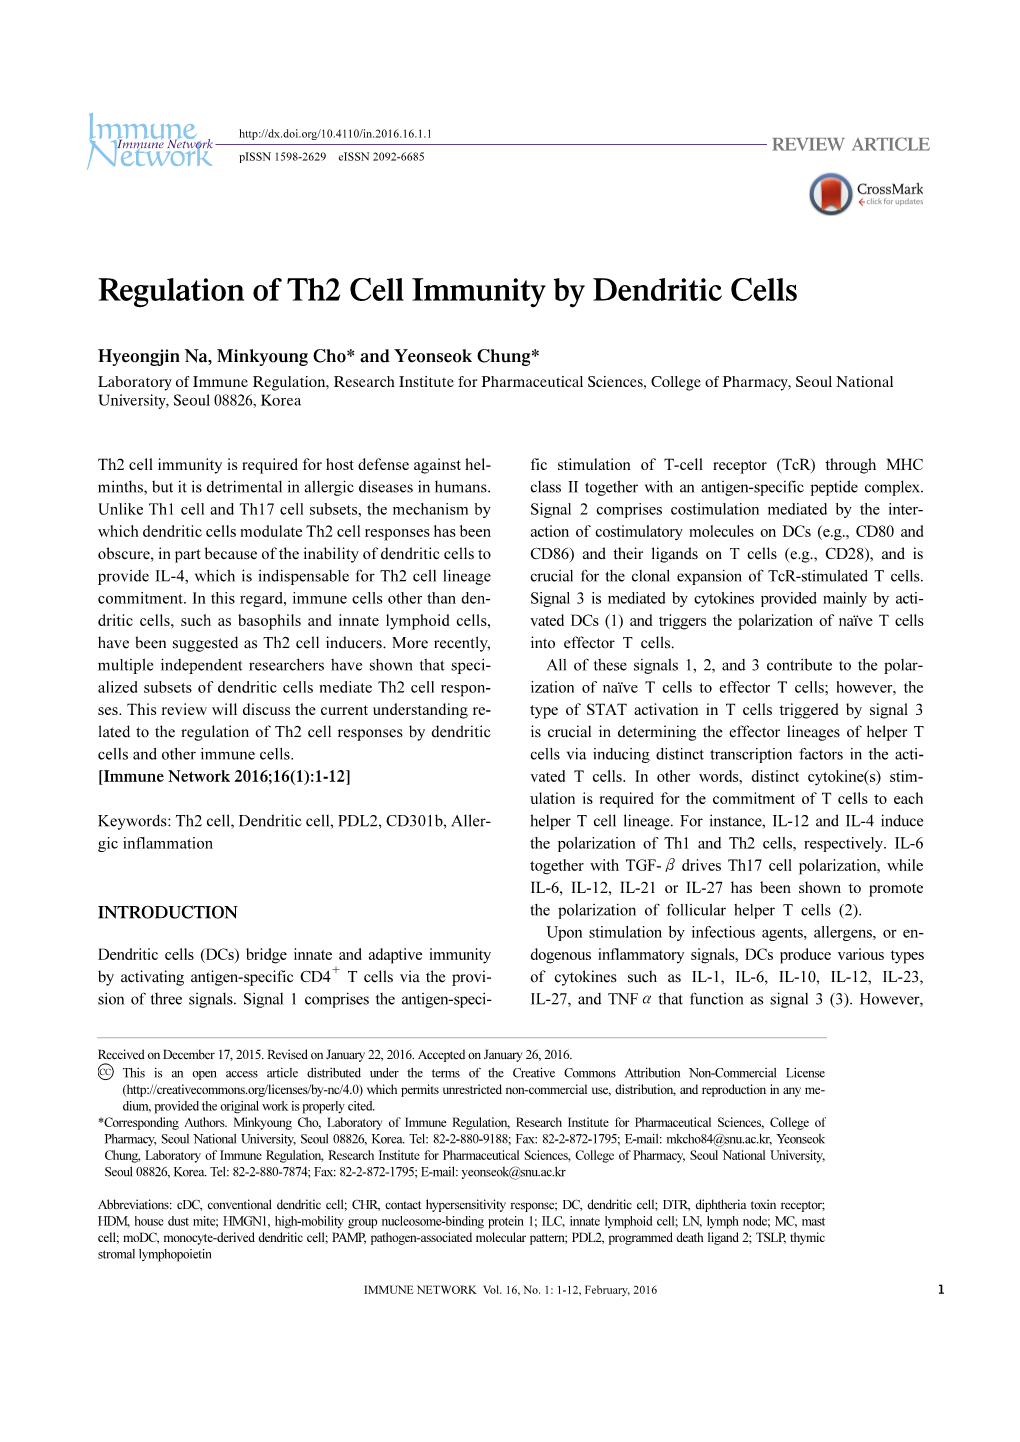 Regulation of Th2 Cell Immunity by Dendritic Cells